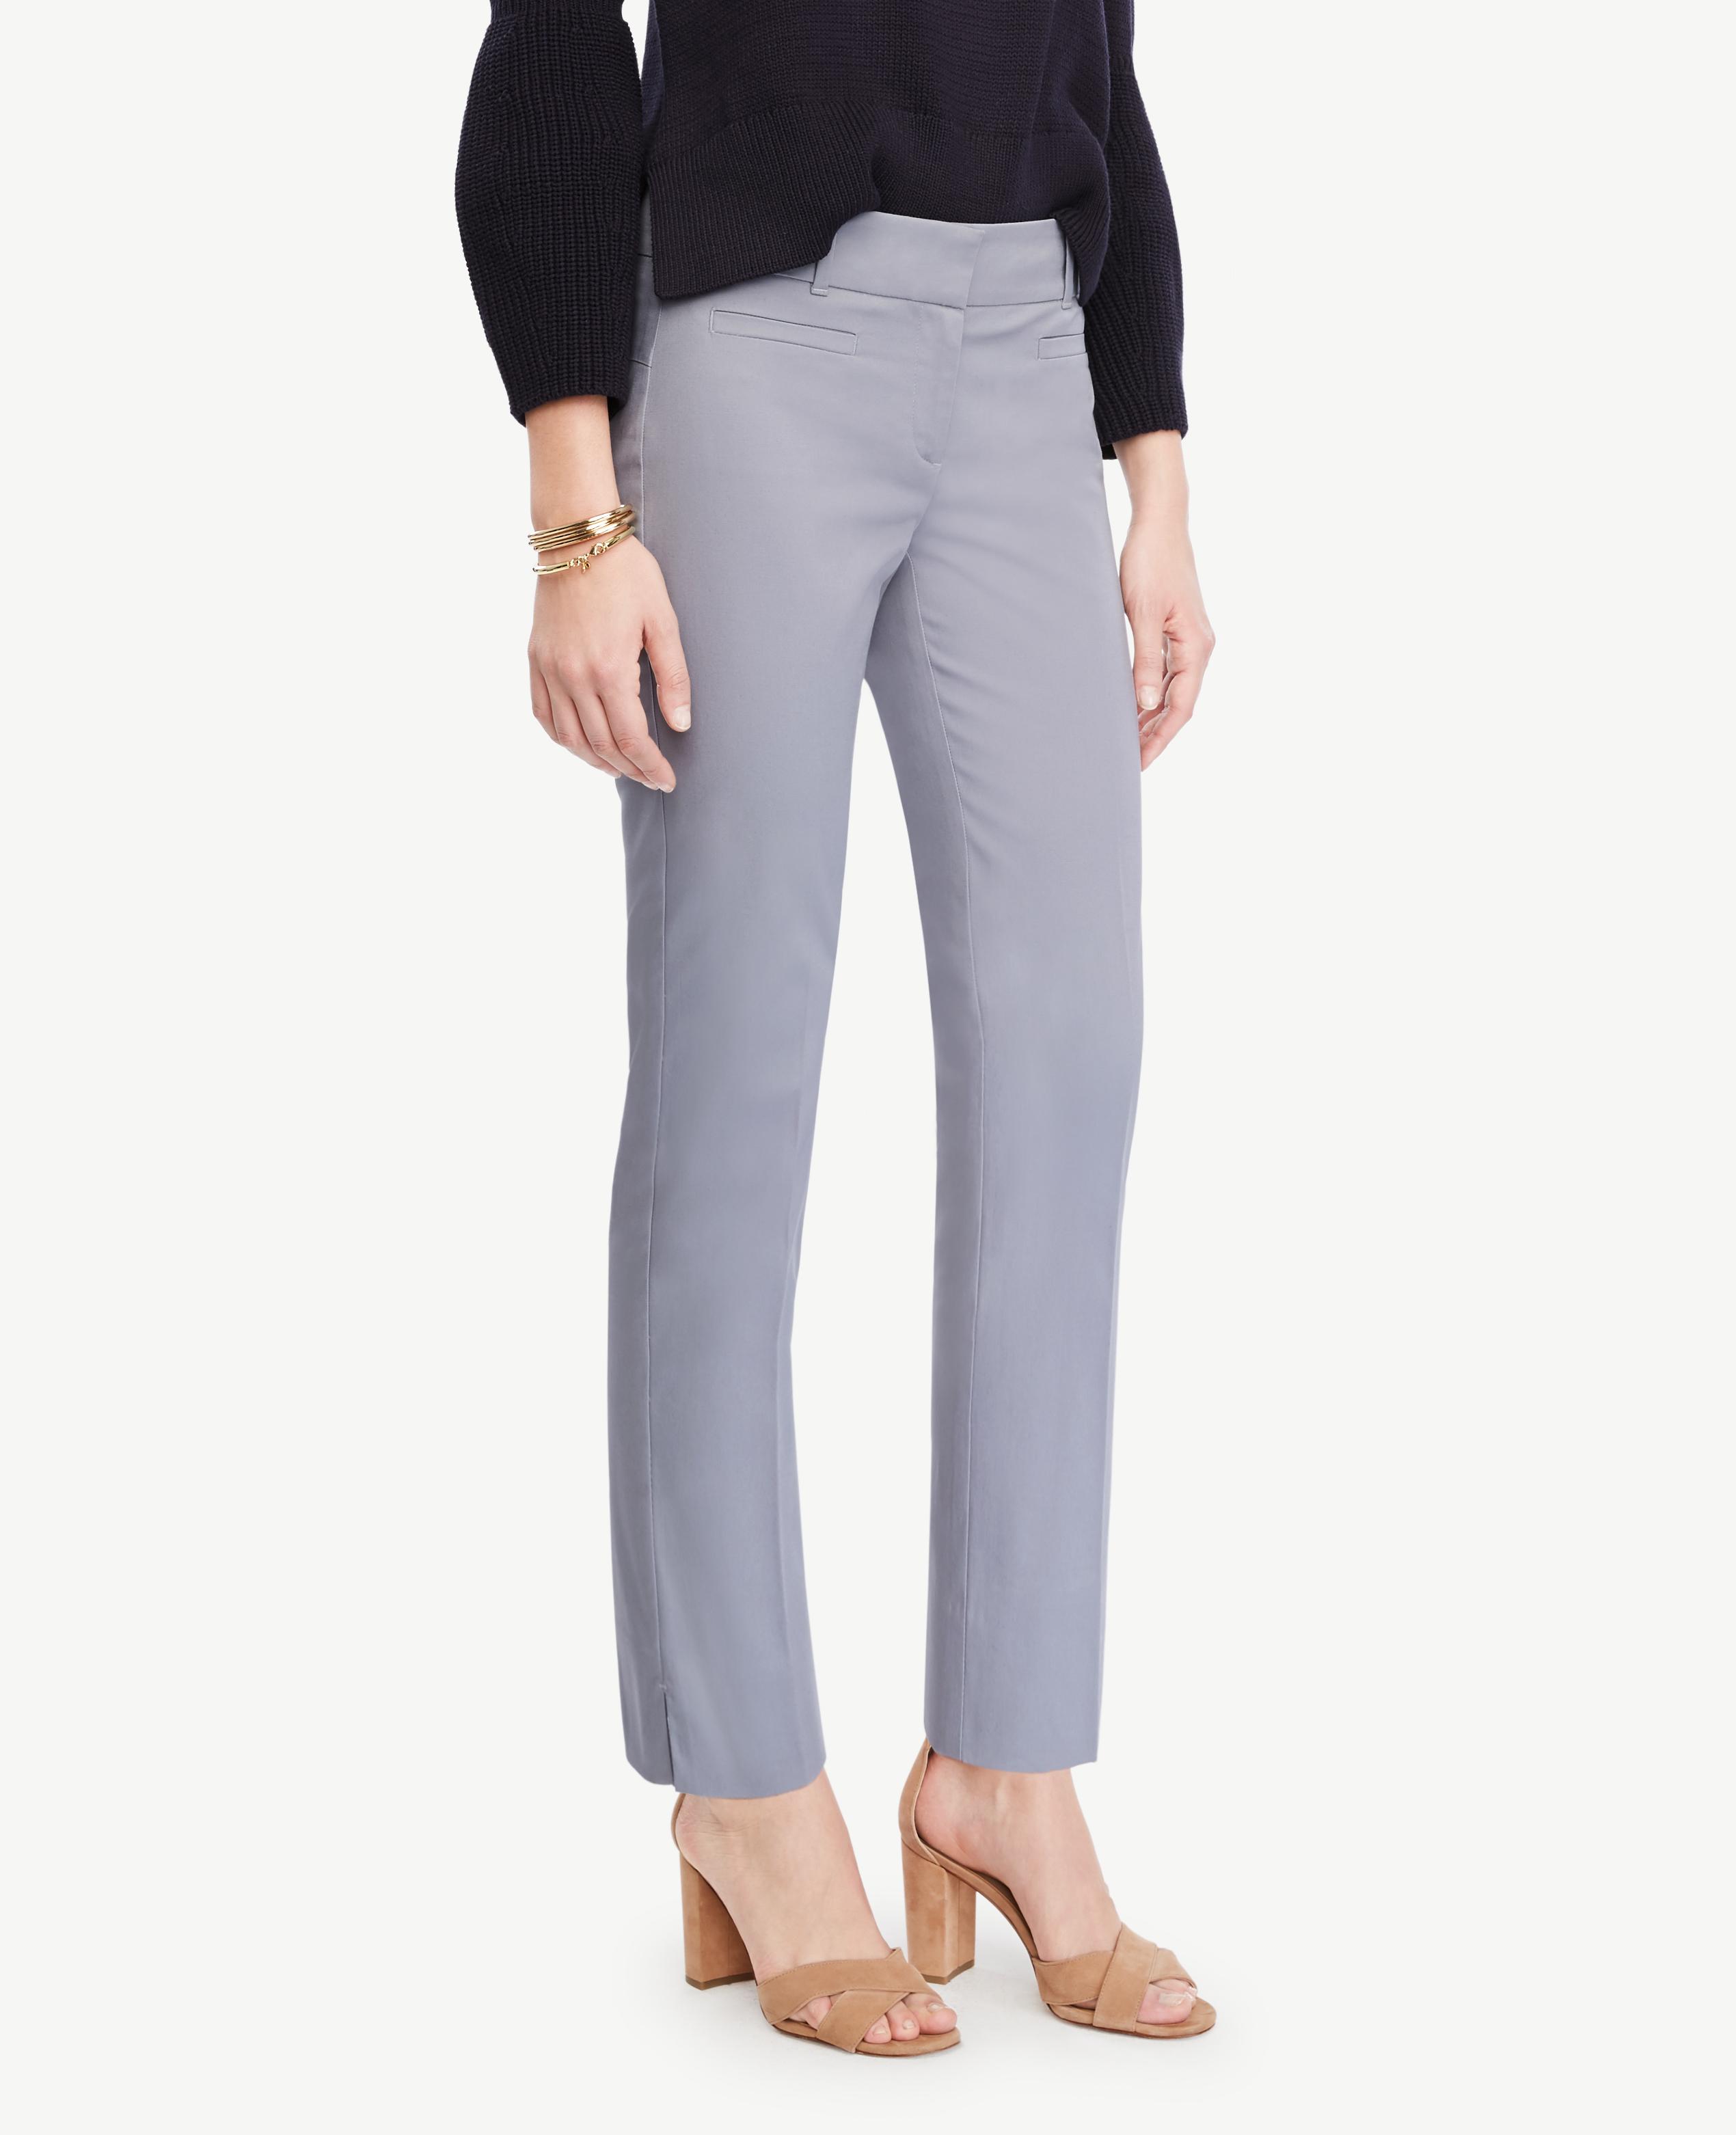 Ann taylor The Petite Crop Pant - Devin Fit in Gray | Lyst